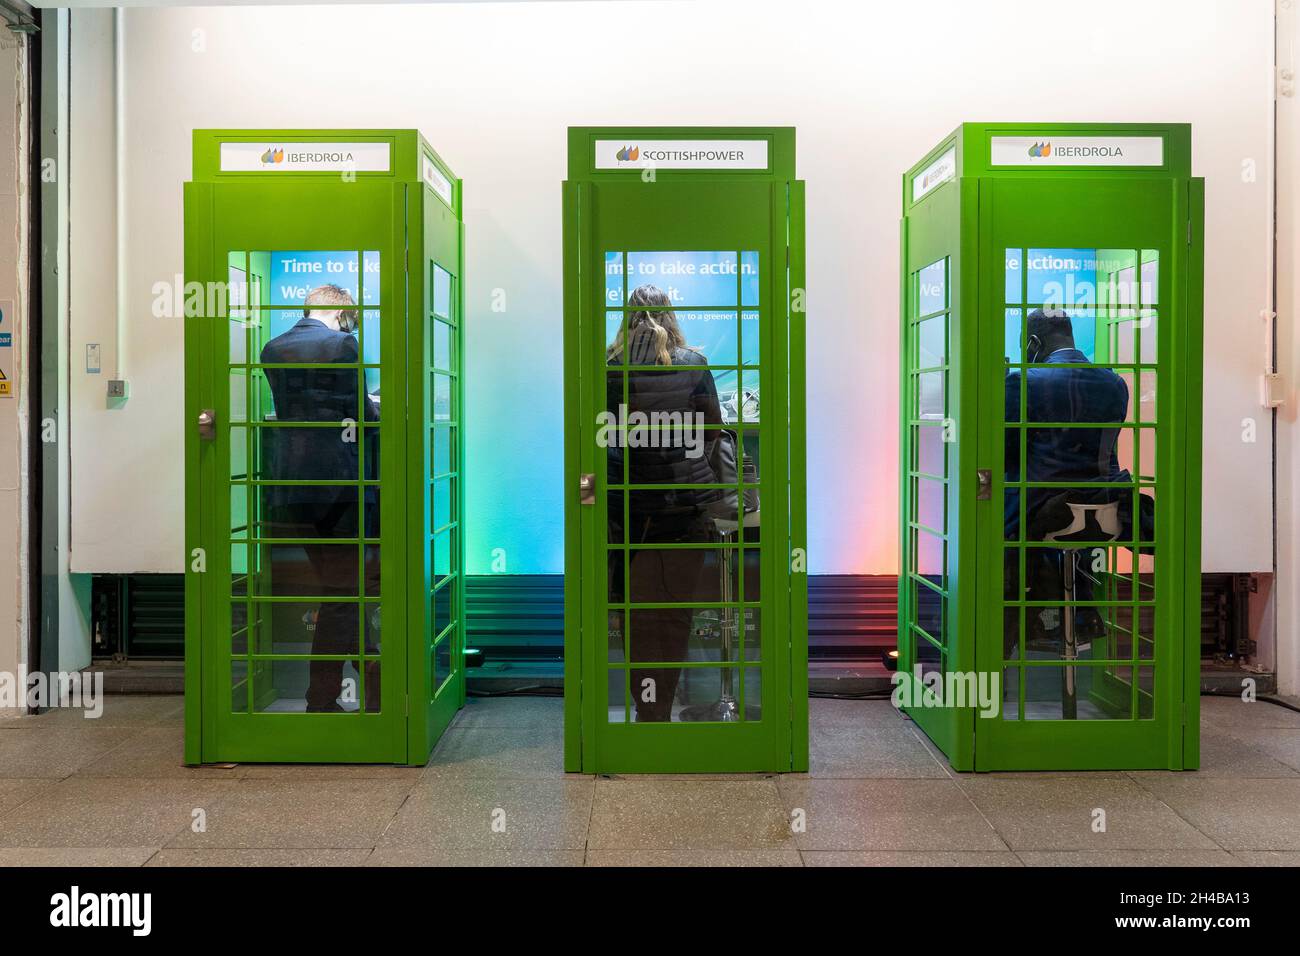 Glasgow, Scotland, UK. 1st November 2021. Images from Monday at the UN climate change conference in Glasgow. Pic; Green telephone boxes at the COP26 venue.   Iain Masterton/Alamy Live News. Stock Photo